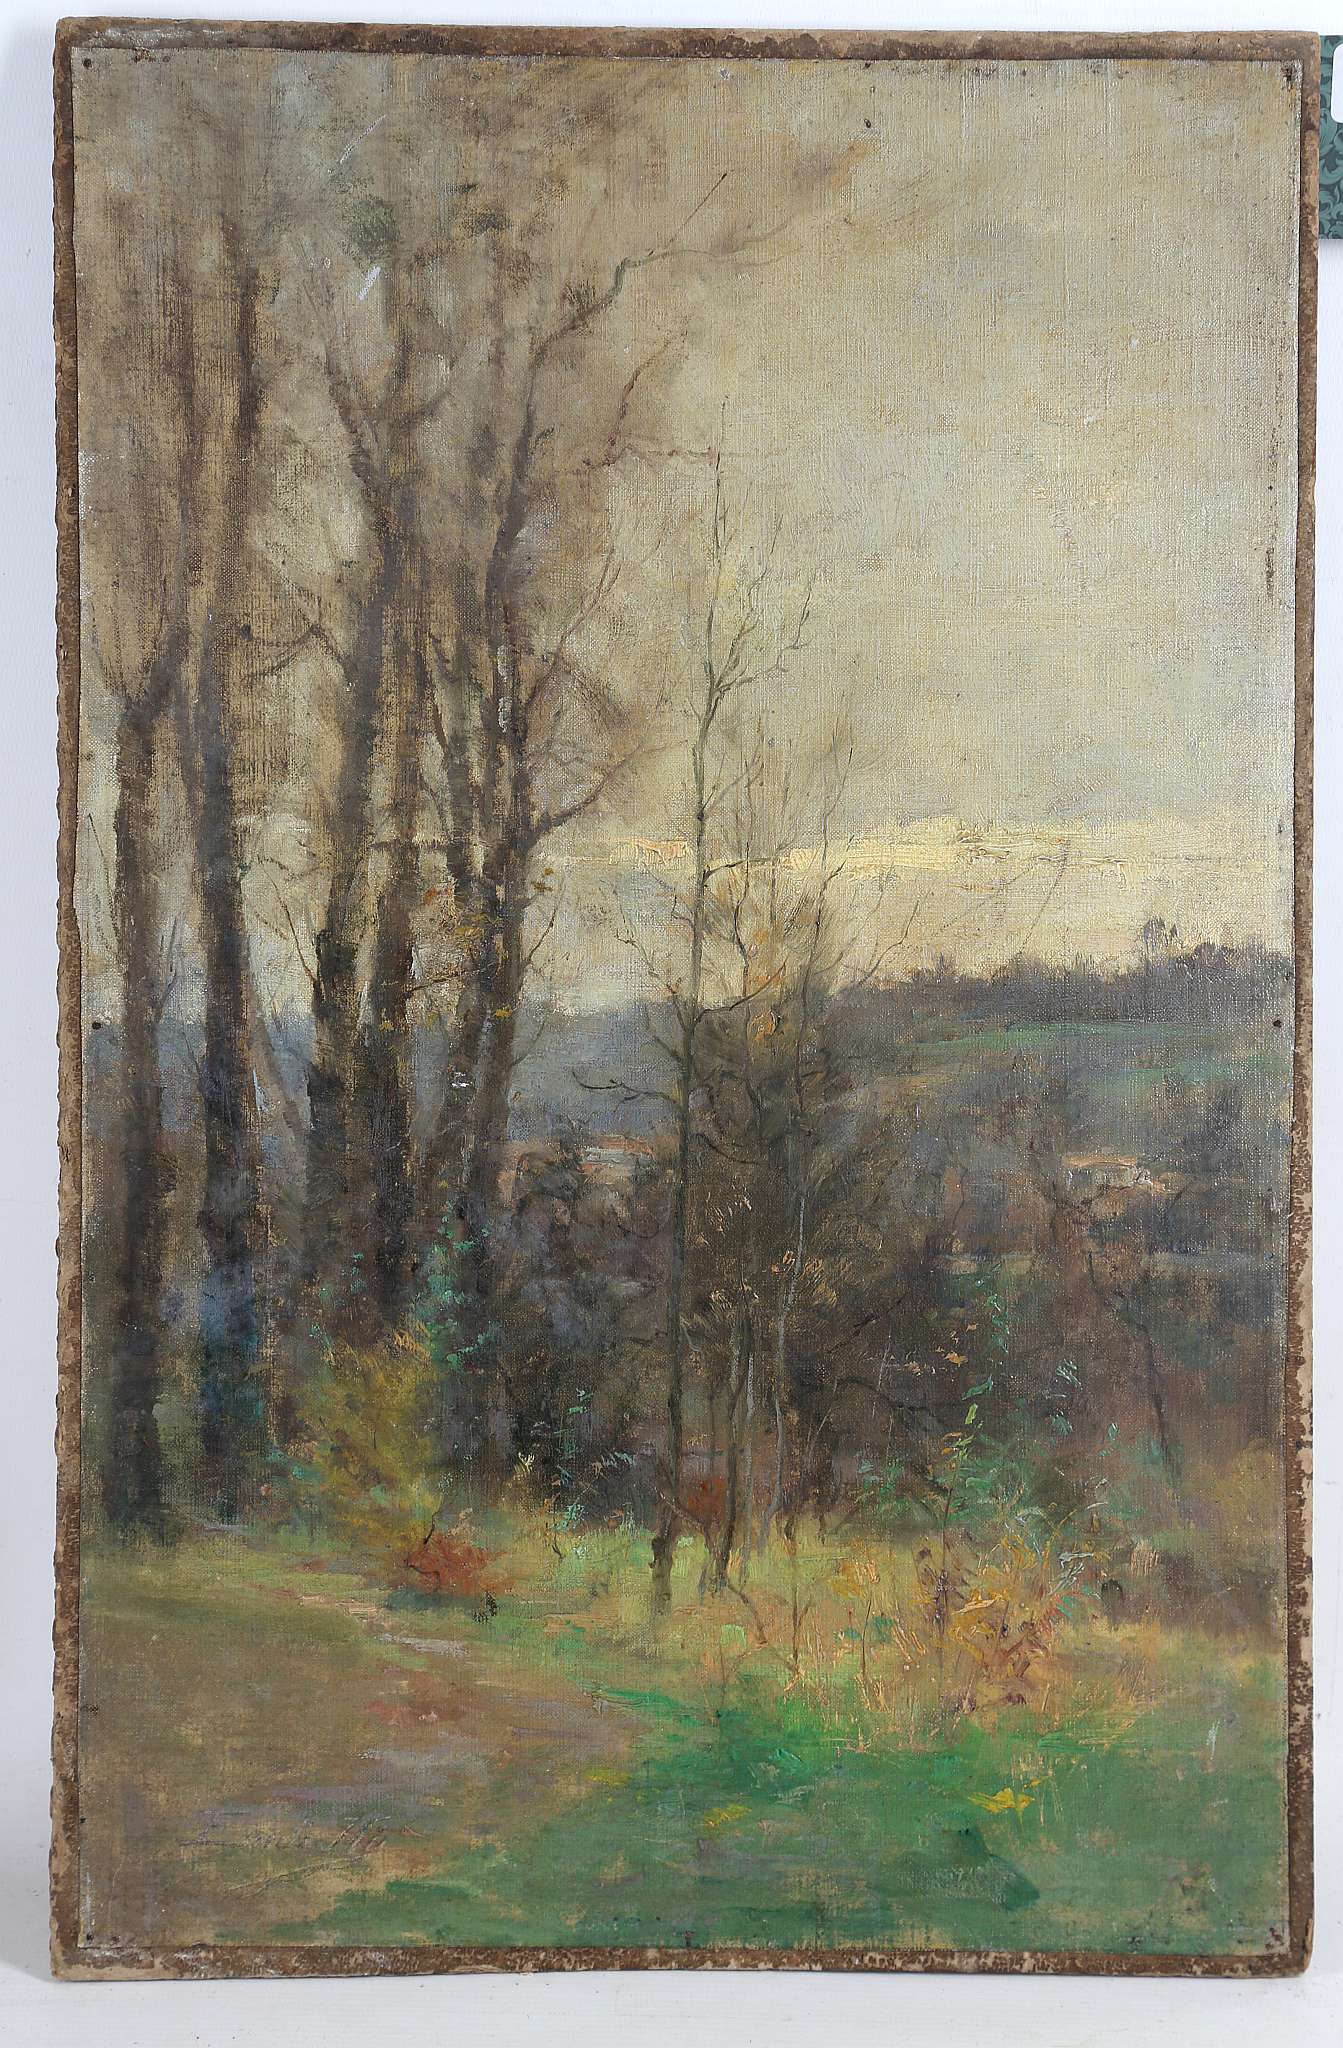 *** WITHDRAWN *** Late 19th Century British school. 'Autumnal Valley Treescape'. Oil on canvas.